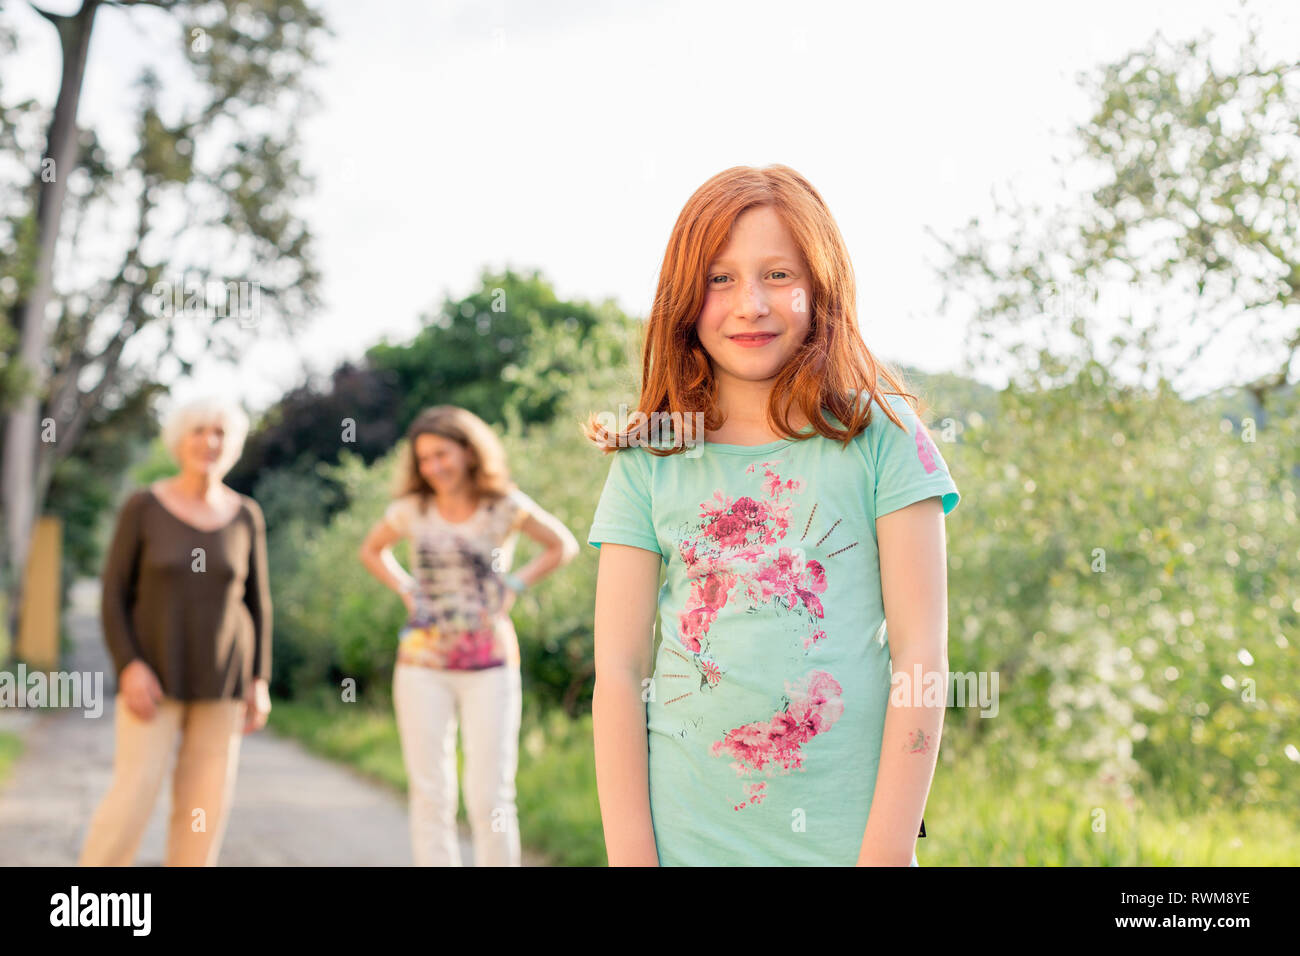 Red haired girl on rural road with mother and grandmother in background, portrait Stock Photo